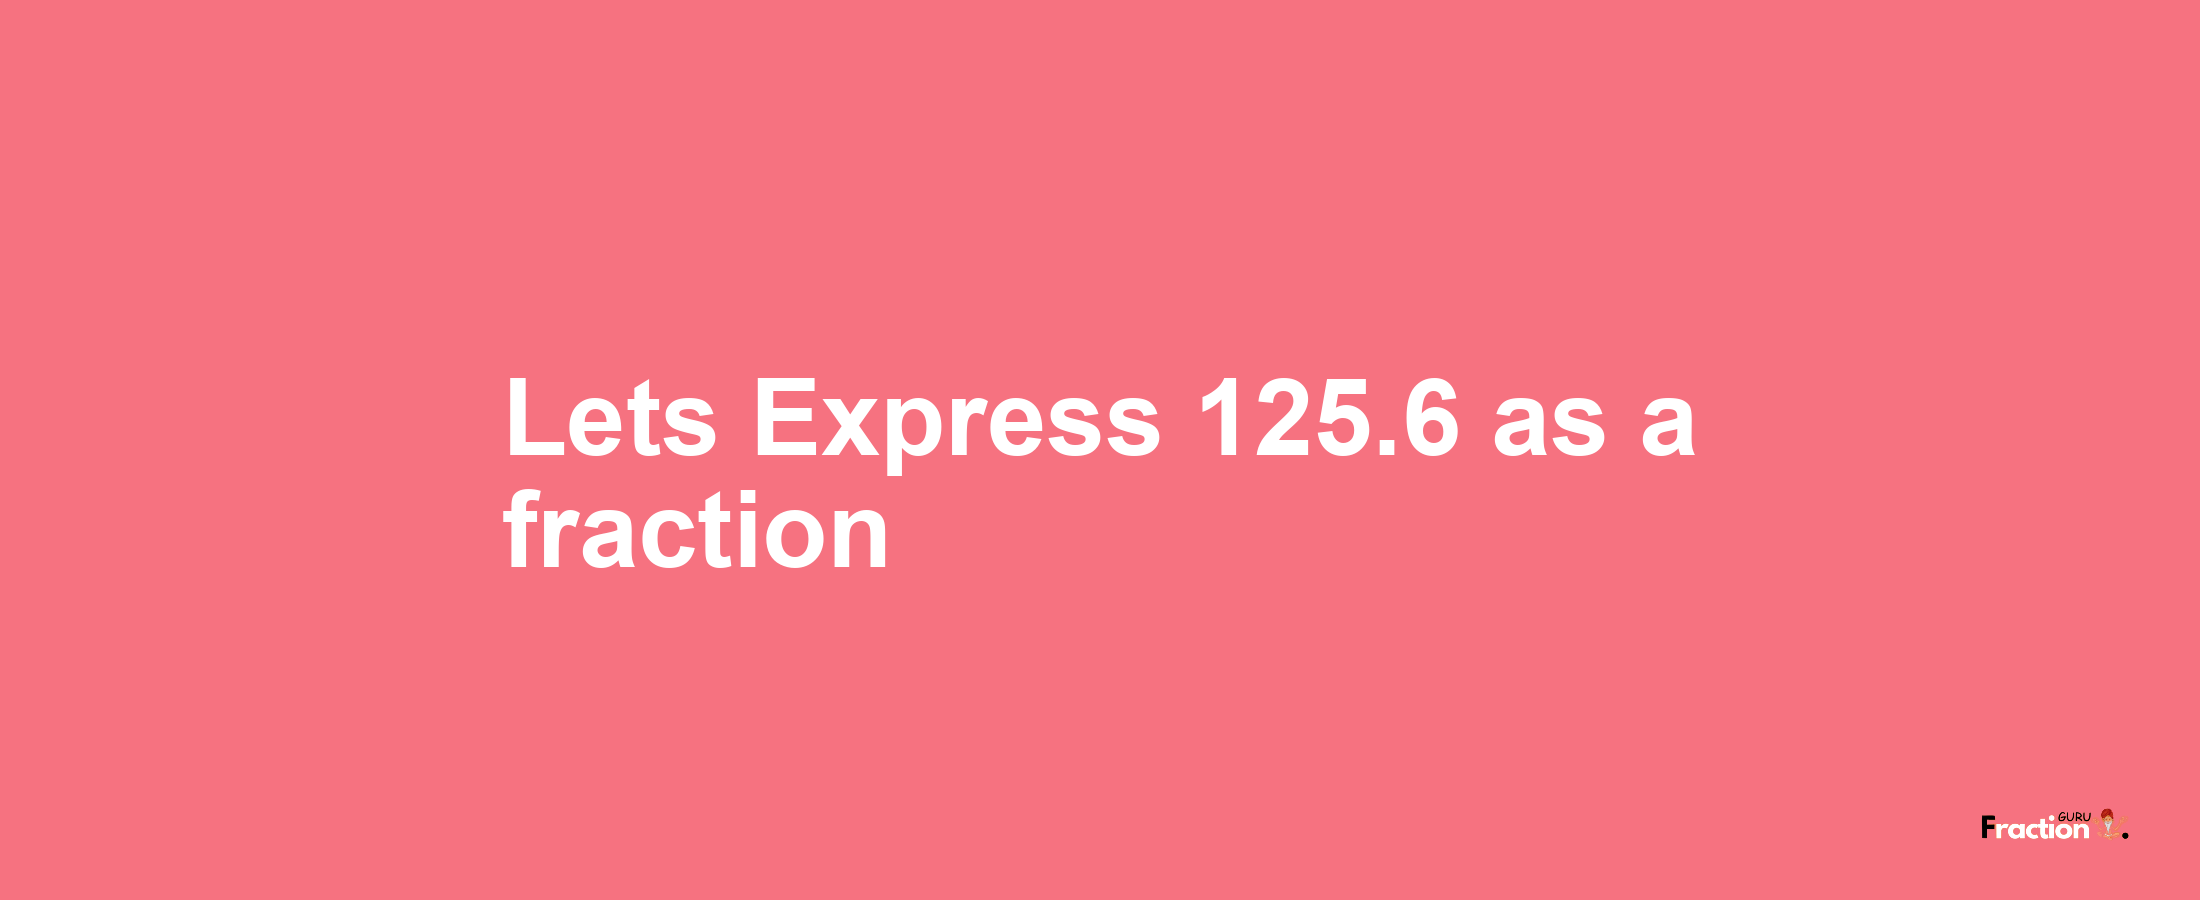 Lets Express 125.6 as afraction